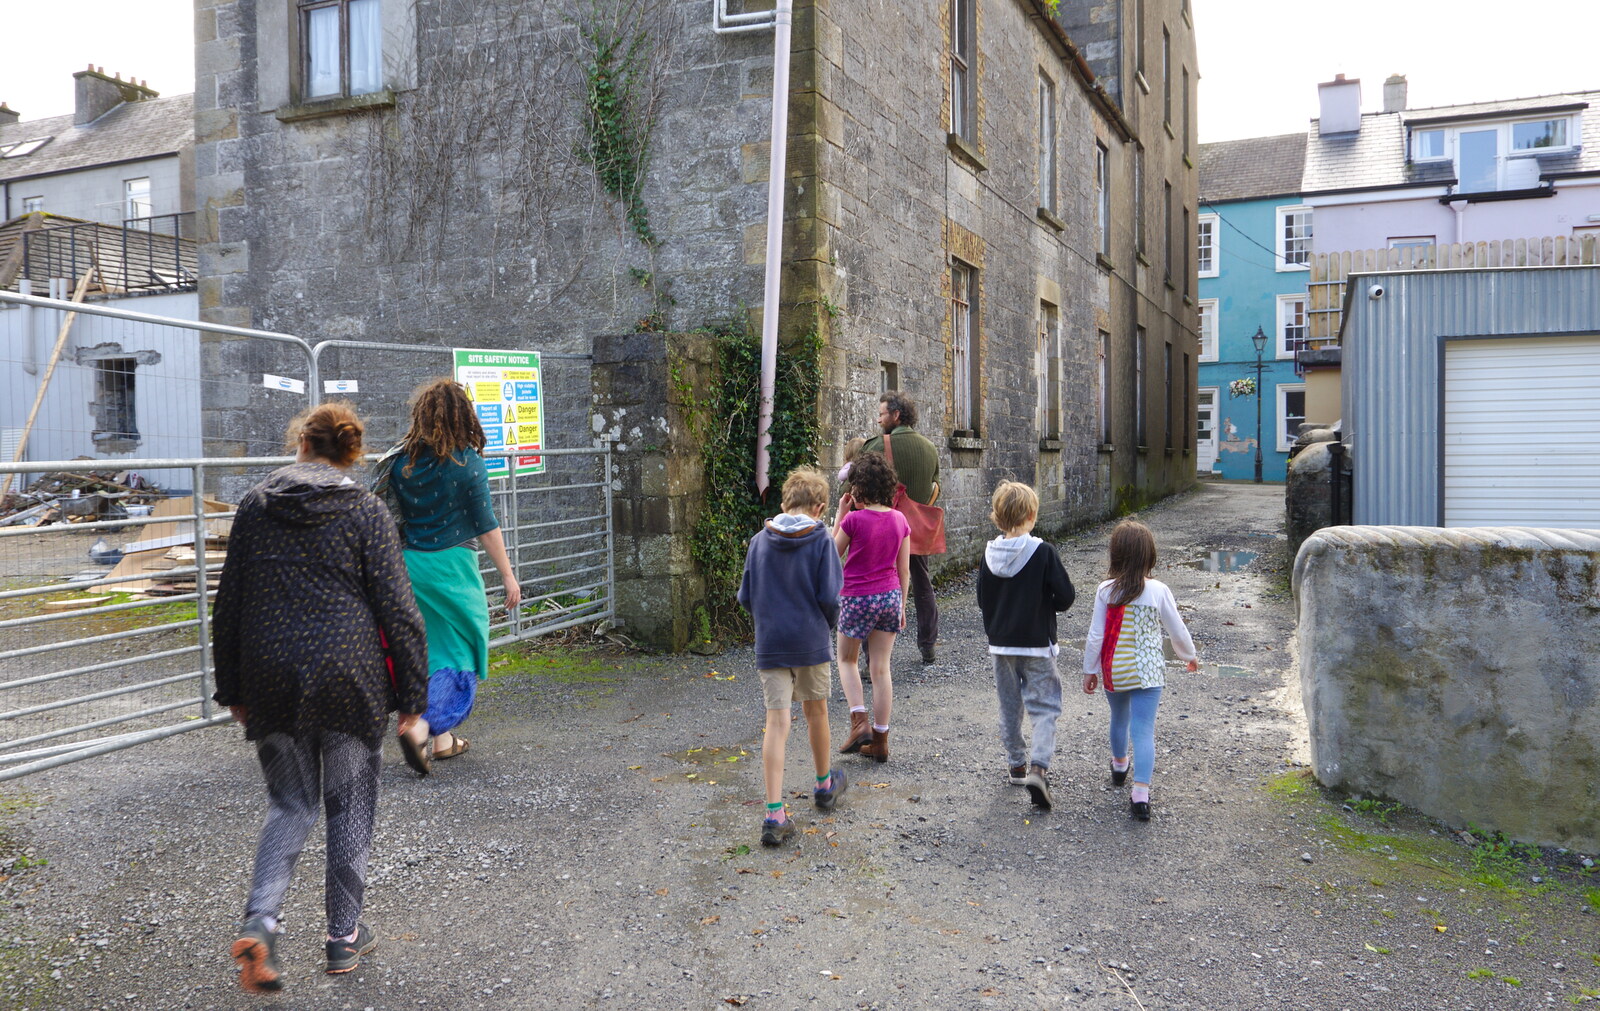 We walk along a back alley back to Main Street from Open Mic Night, Bía Sláinte, Manorhamilton, Ireland - 17th August 2019